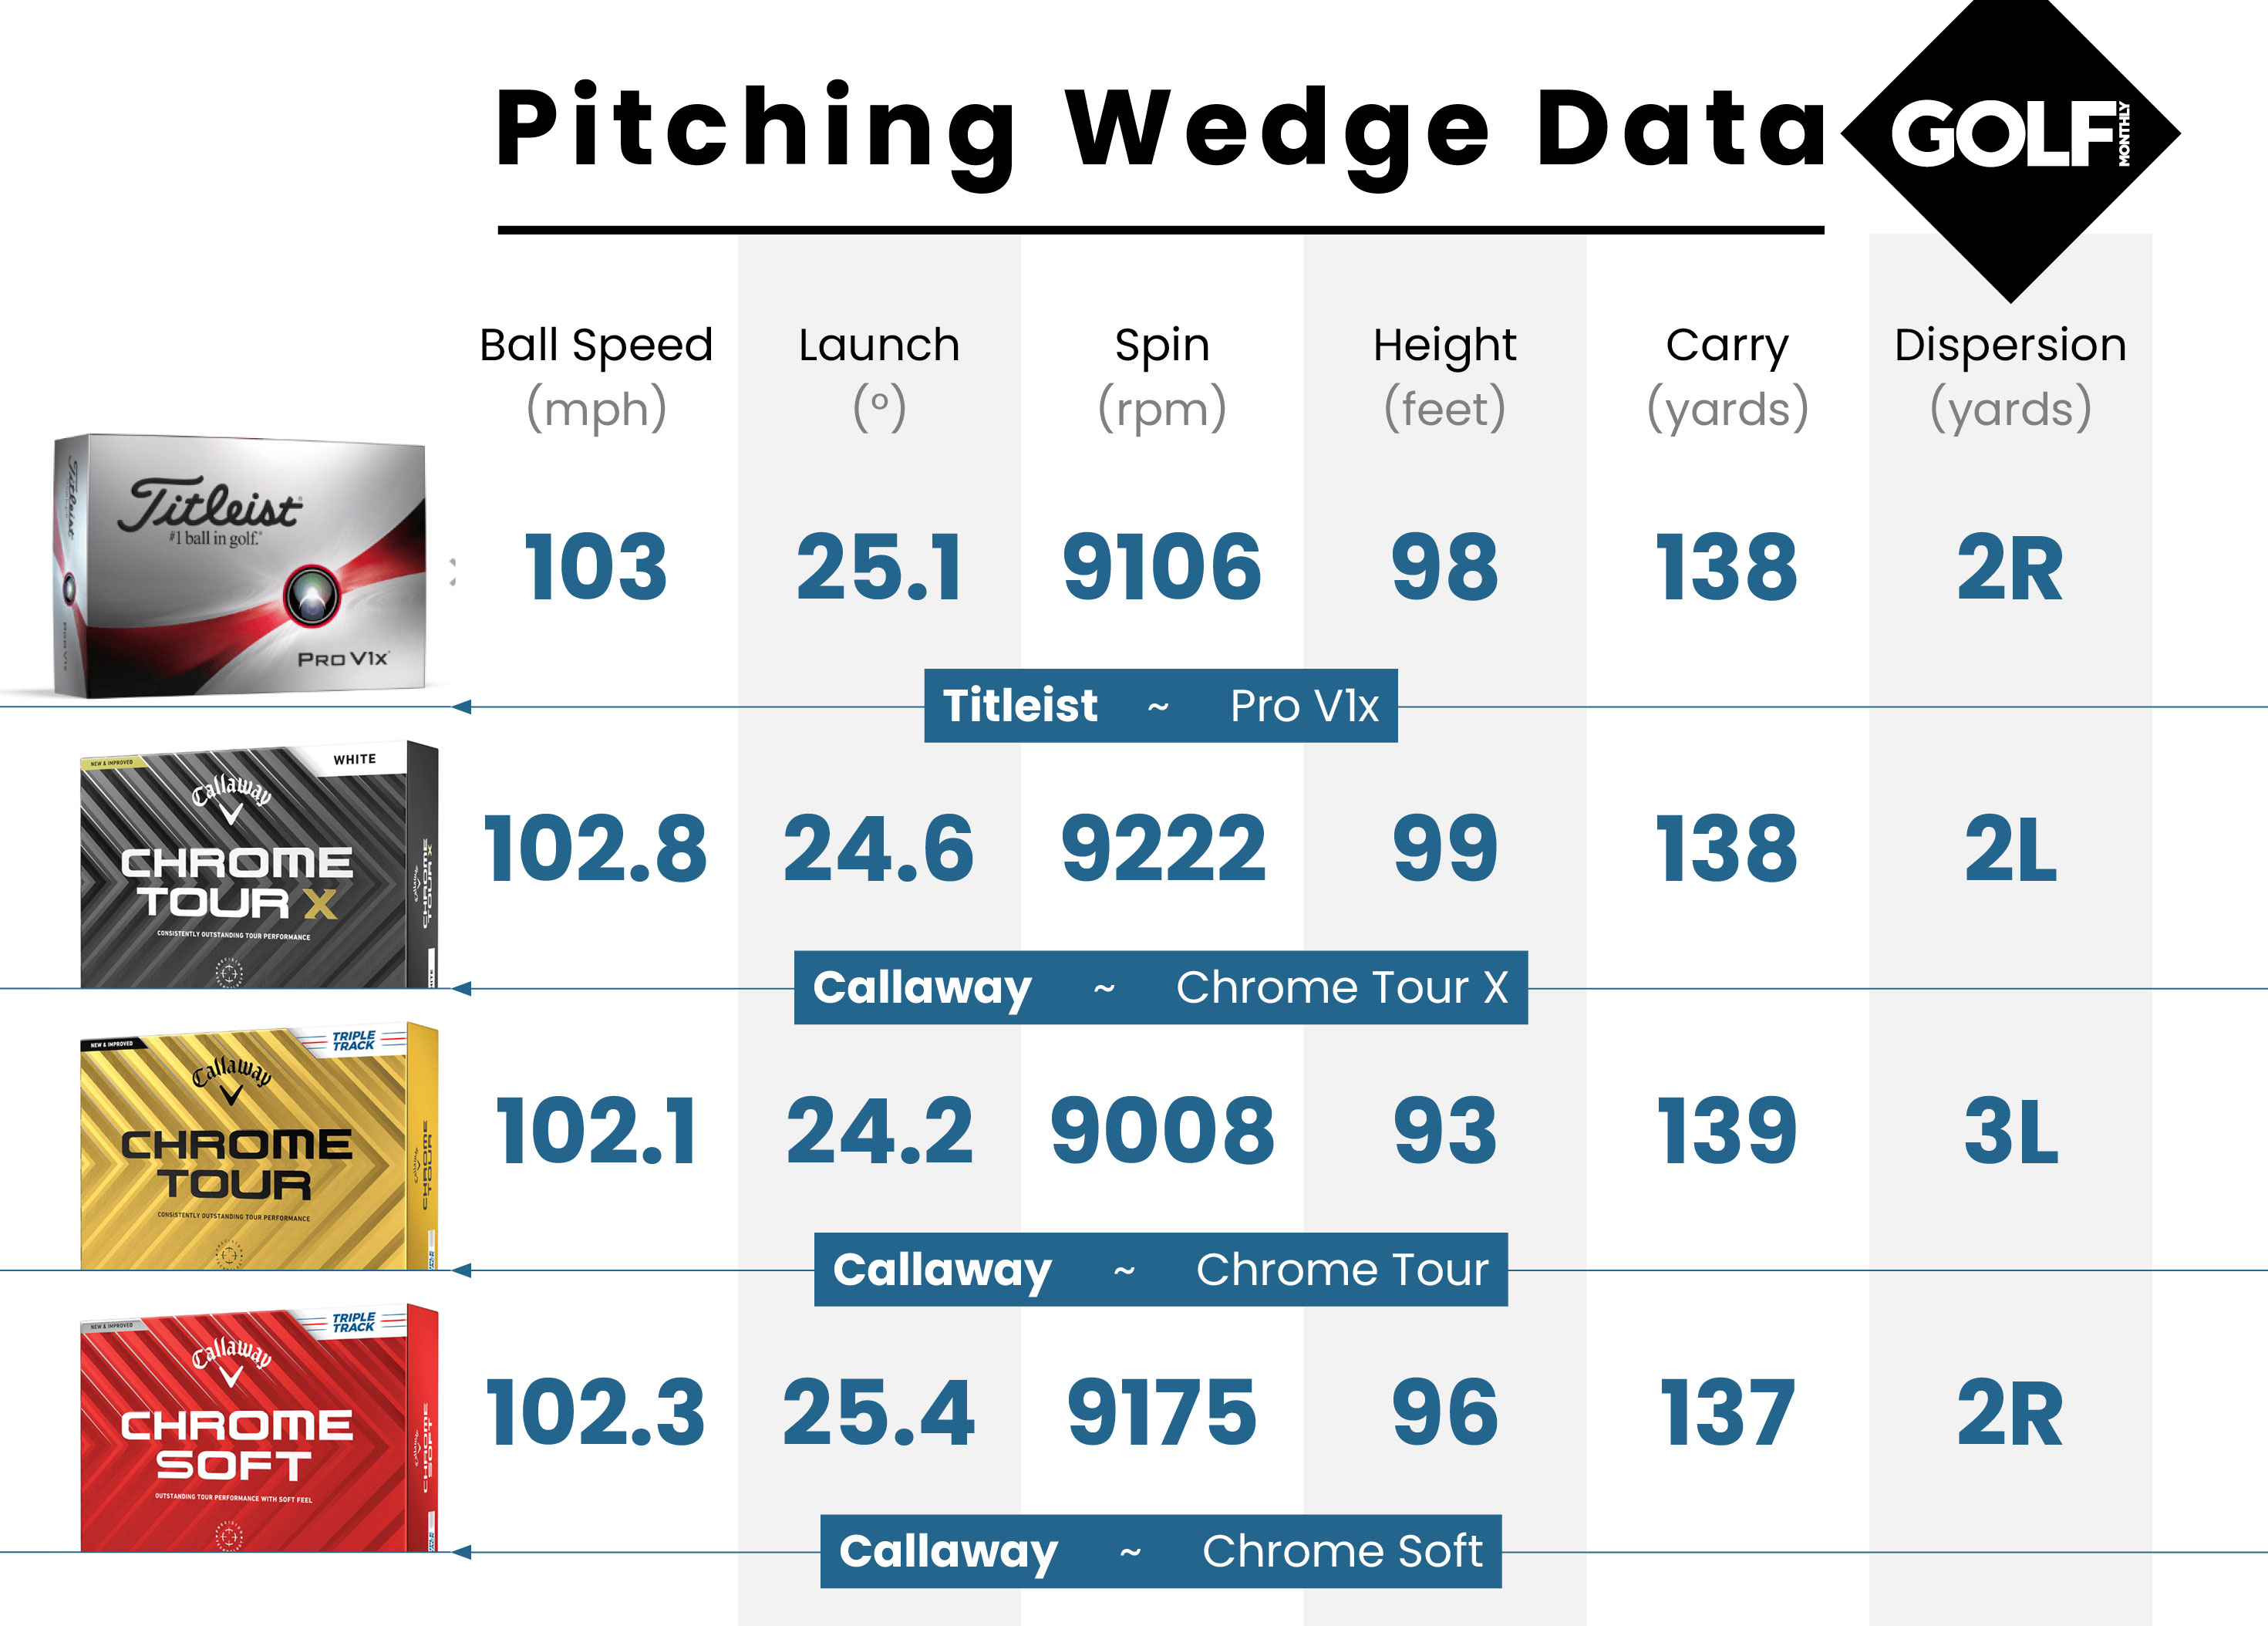 Photo of the wedge data for the Chrome soft golf ball